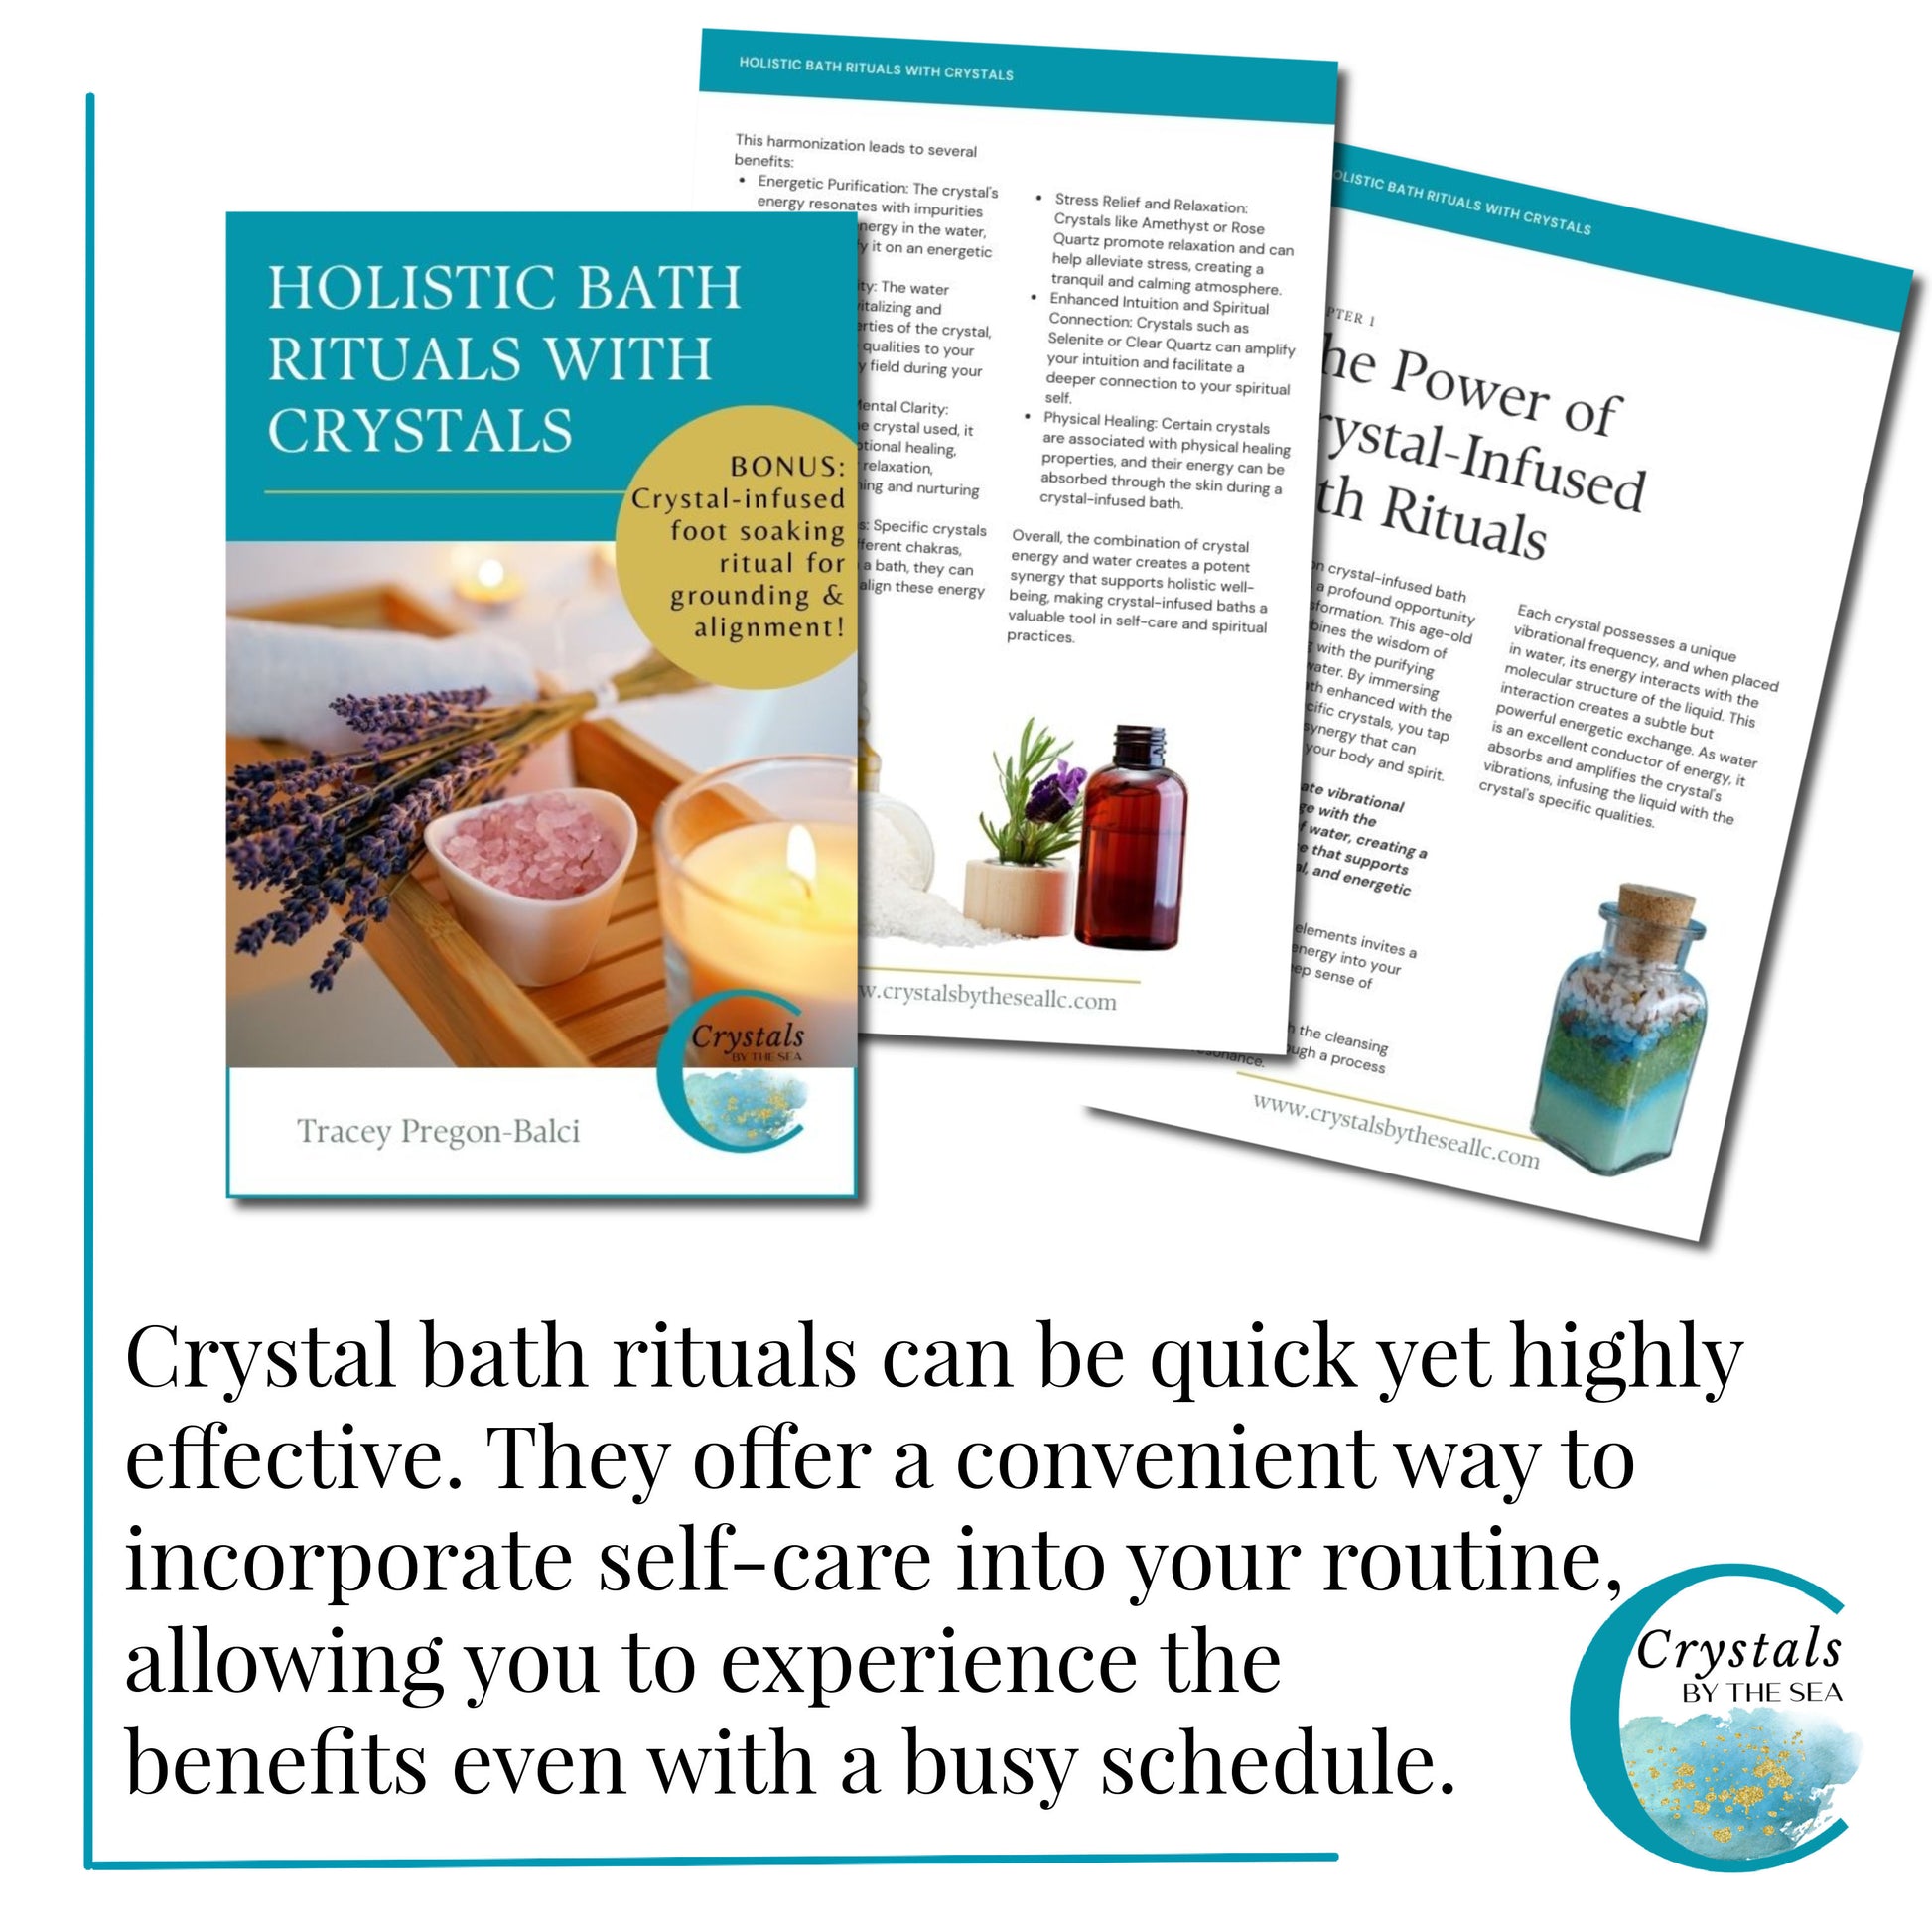 Crystal-Infused Holistic Bath Rituals Paperback Book by Tracey Pregon-Balci